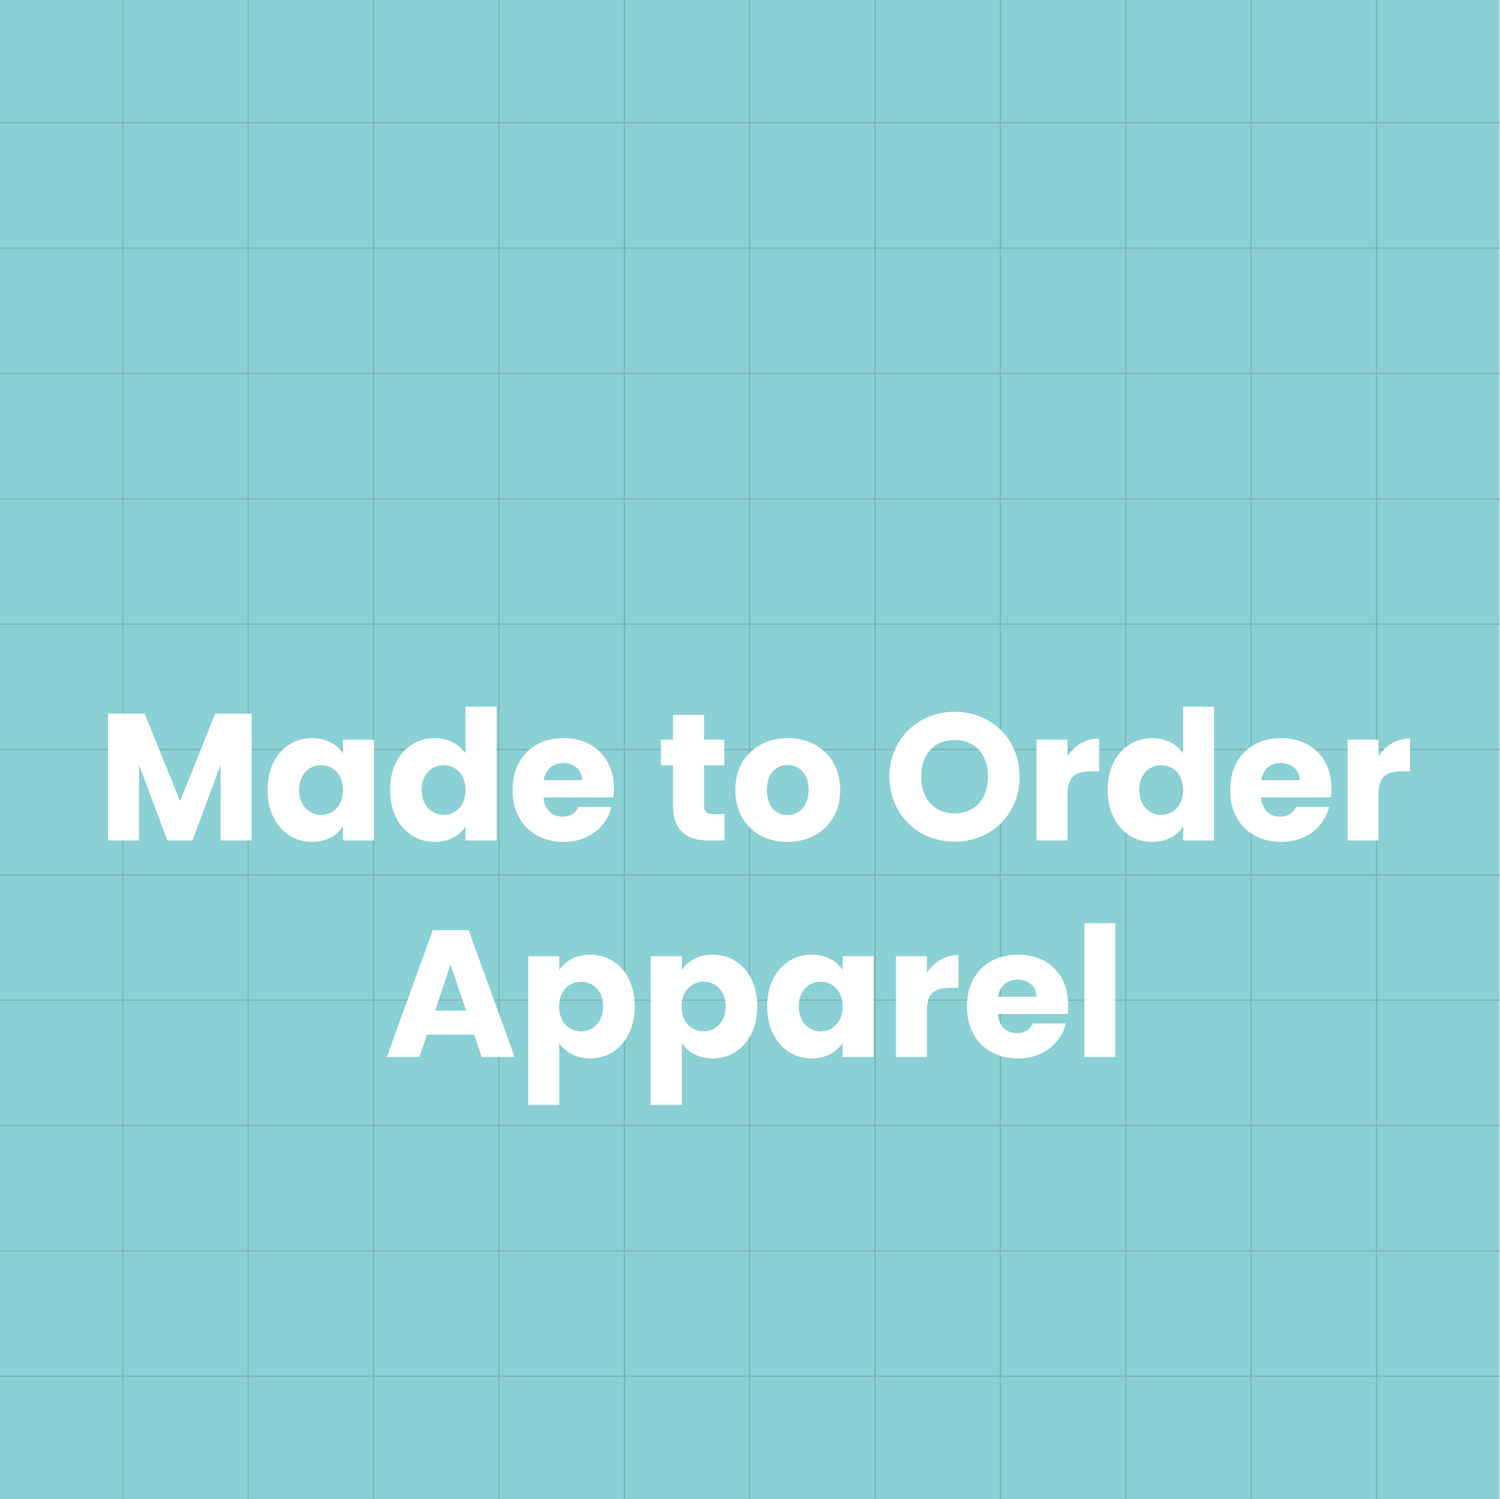 Made to Order Apparel